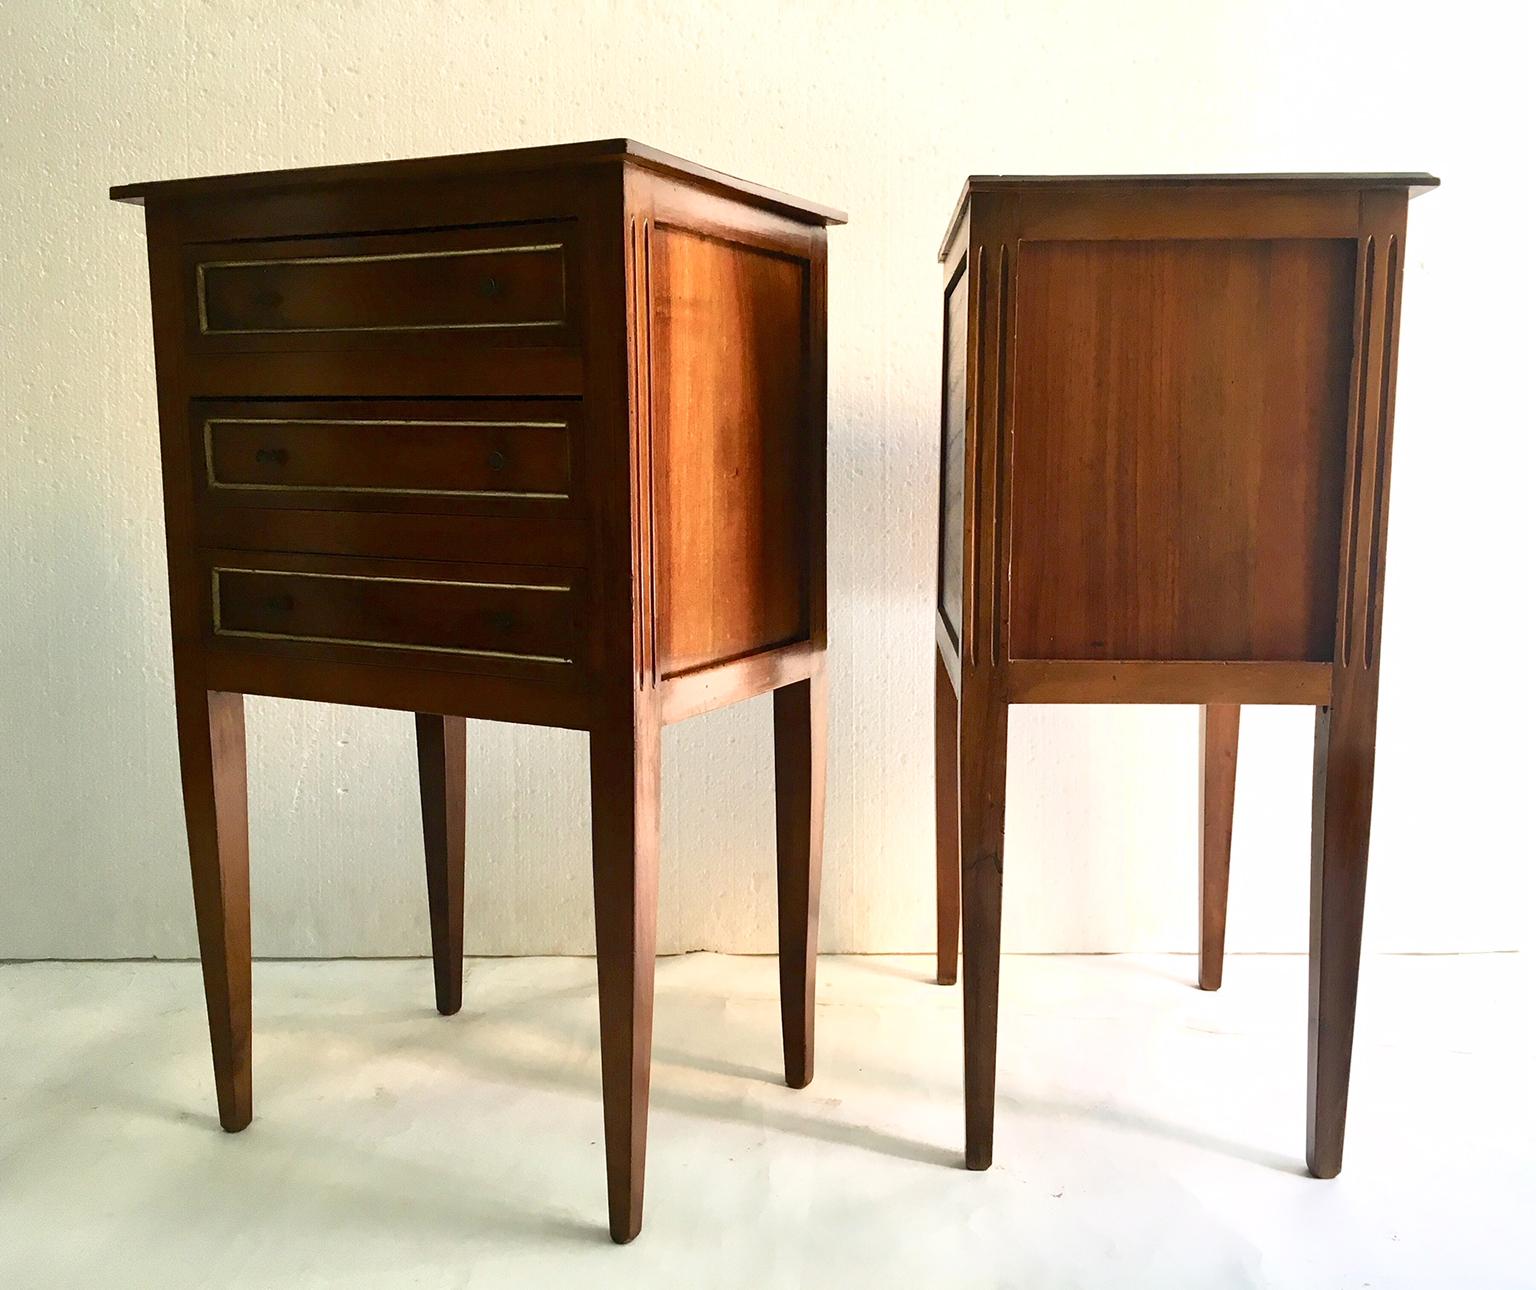 A late 20th century pair of walnut wood bedside tables or nightstands in the Louis XVI manner, each with three drawers with a simple brass fillet.